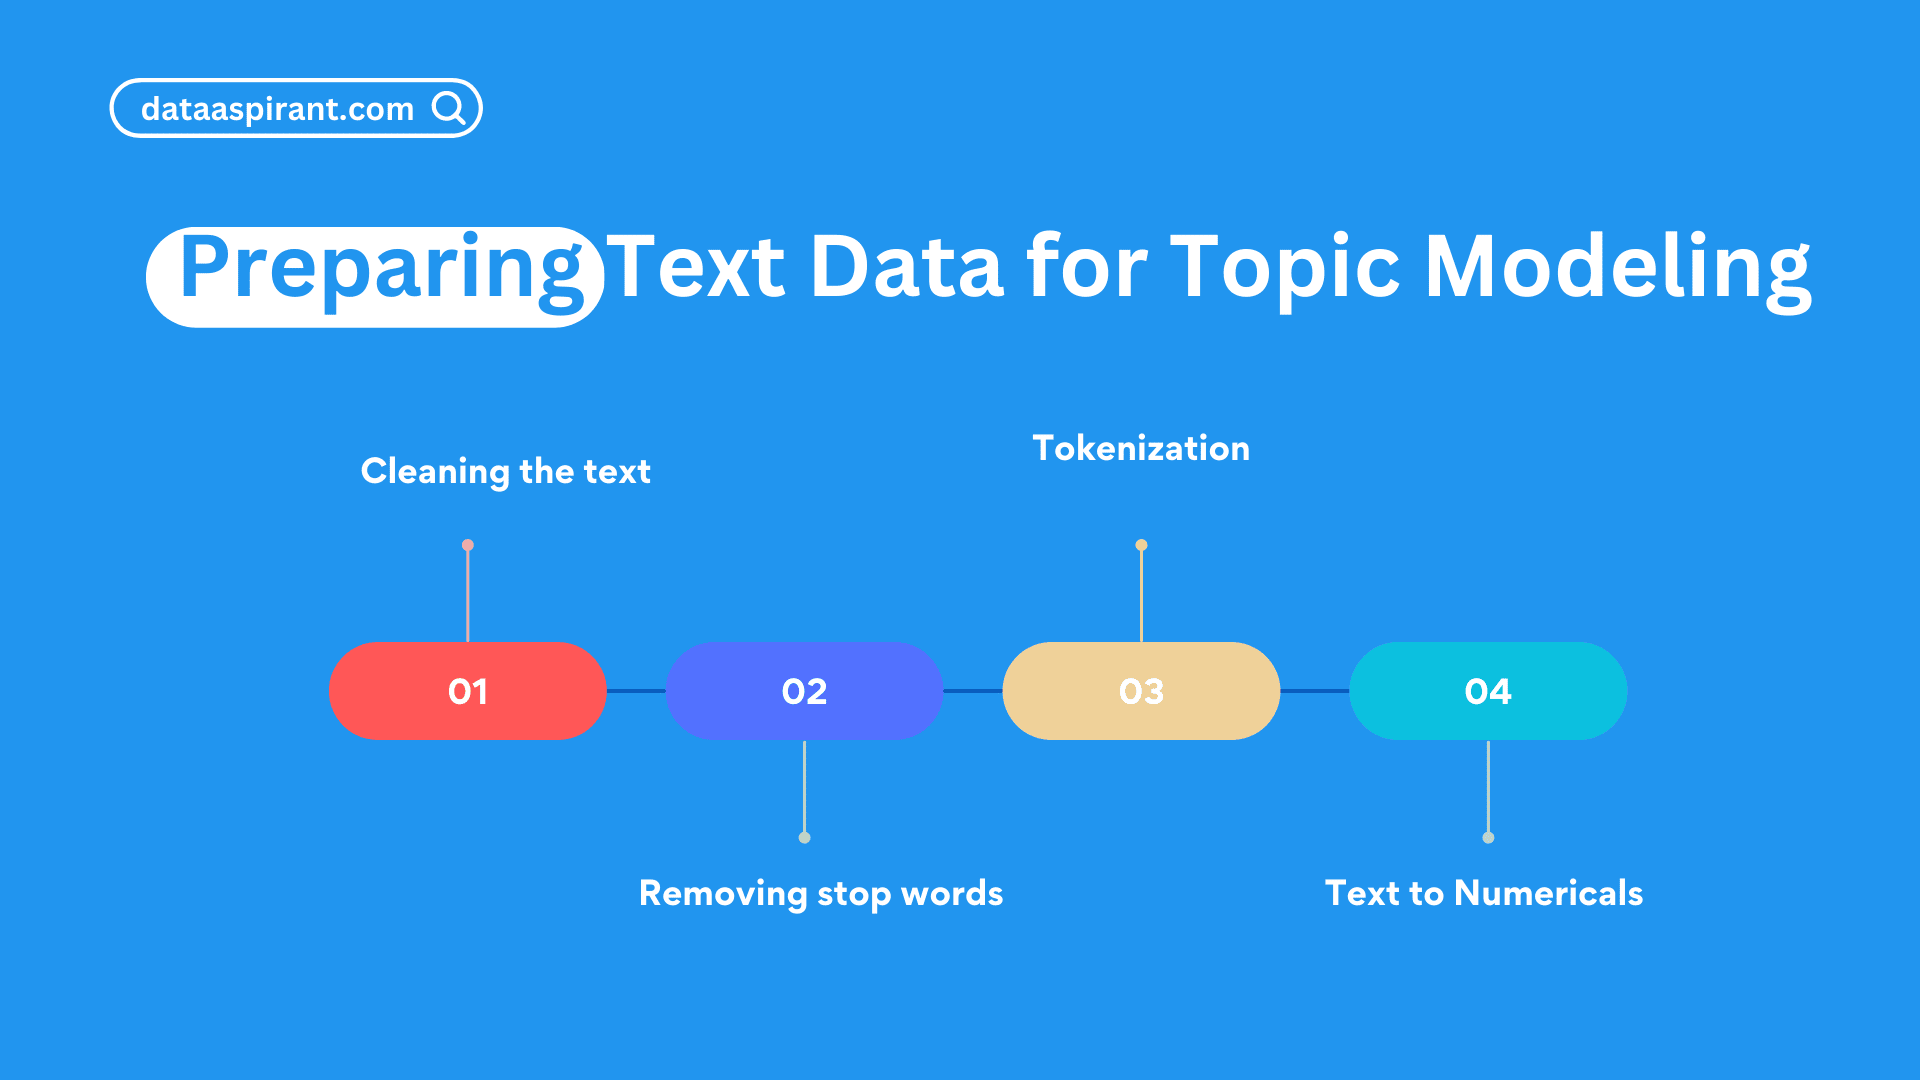 Preparing Text Data for Topic Modeling